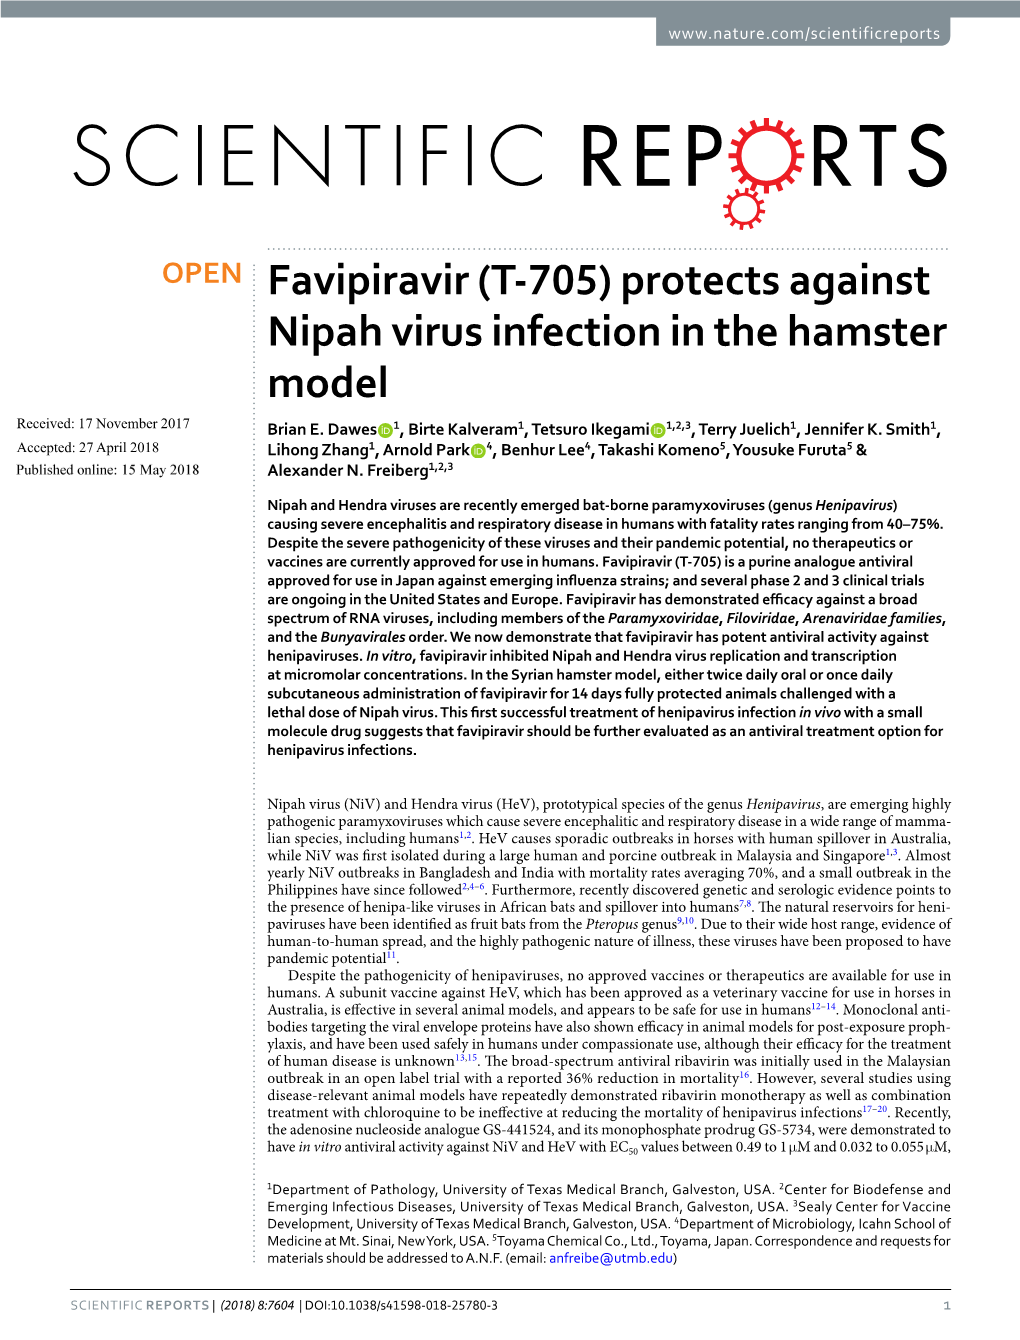 Favipiravir (T-705) Protects Against Nipah Virus Infection in the Hamster Model Received: 17 November 2017 Brian E